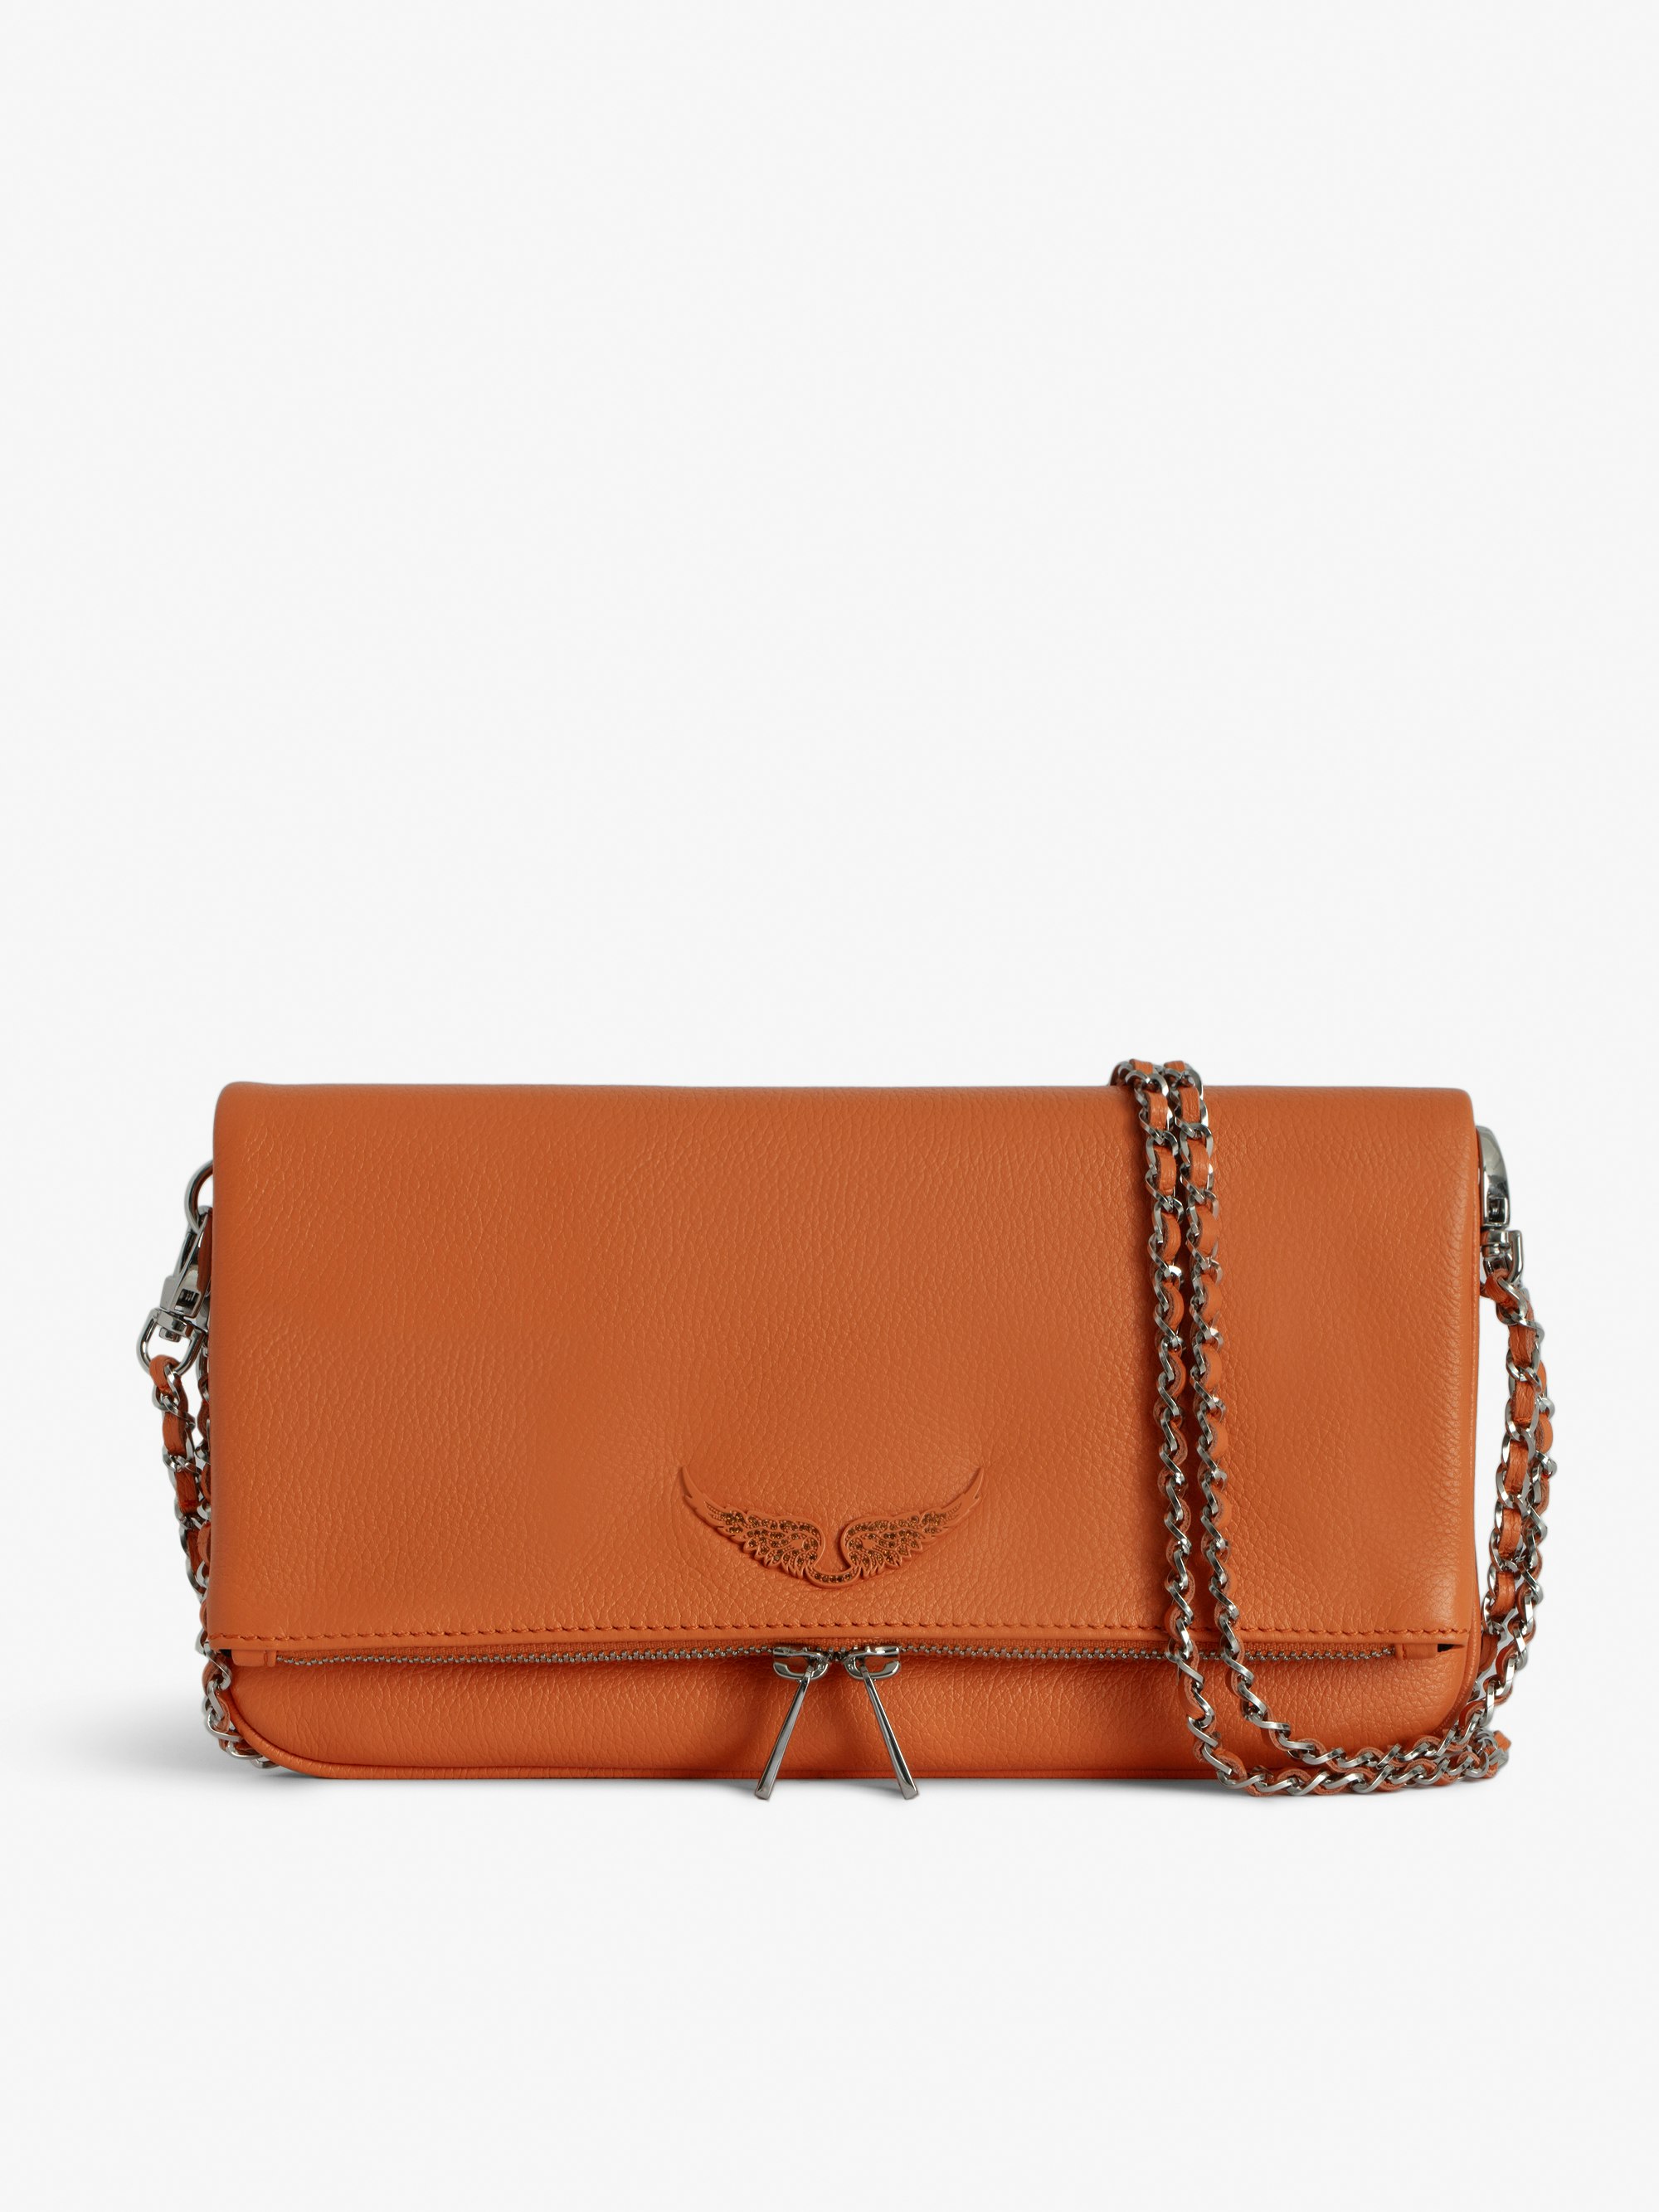 Rock Clutch - Grained leather clutch with double chain and signature wings.